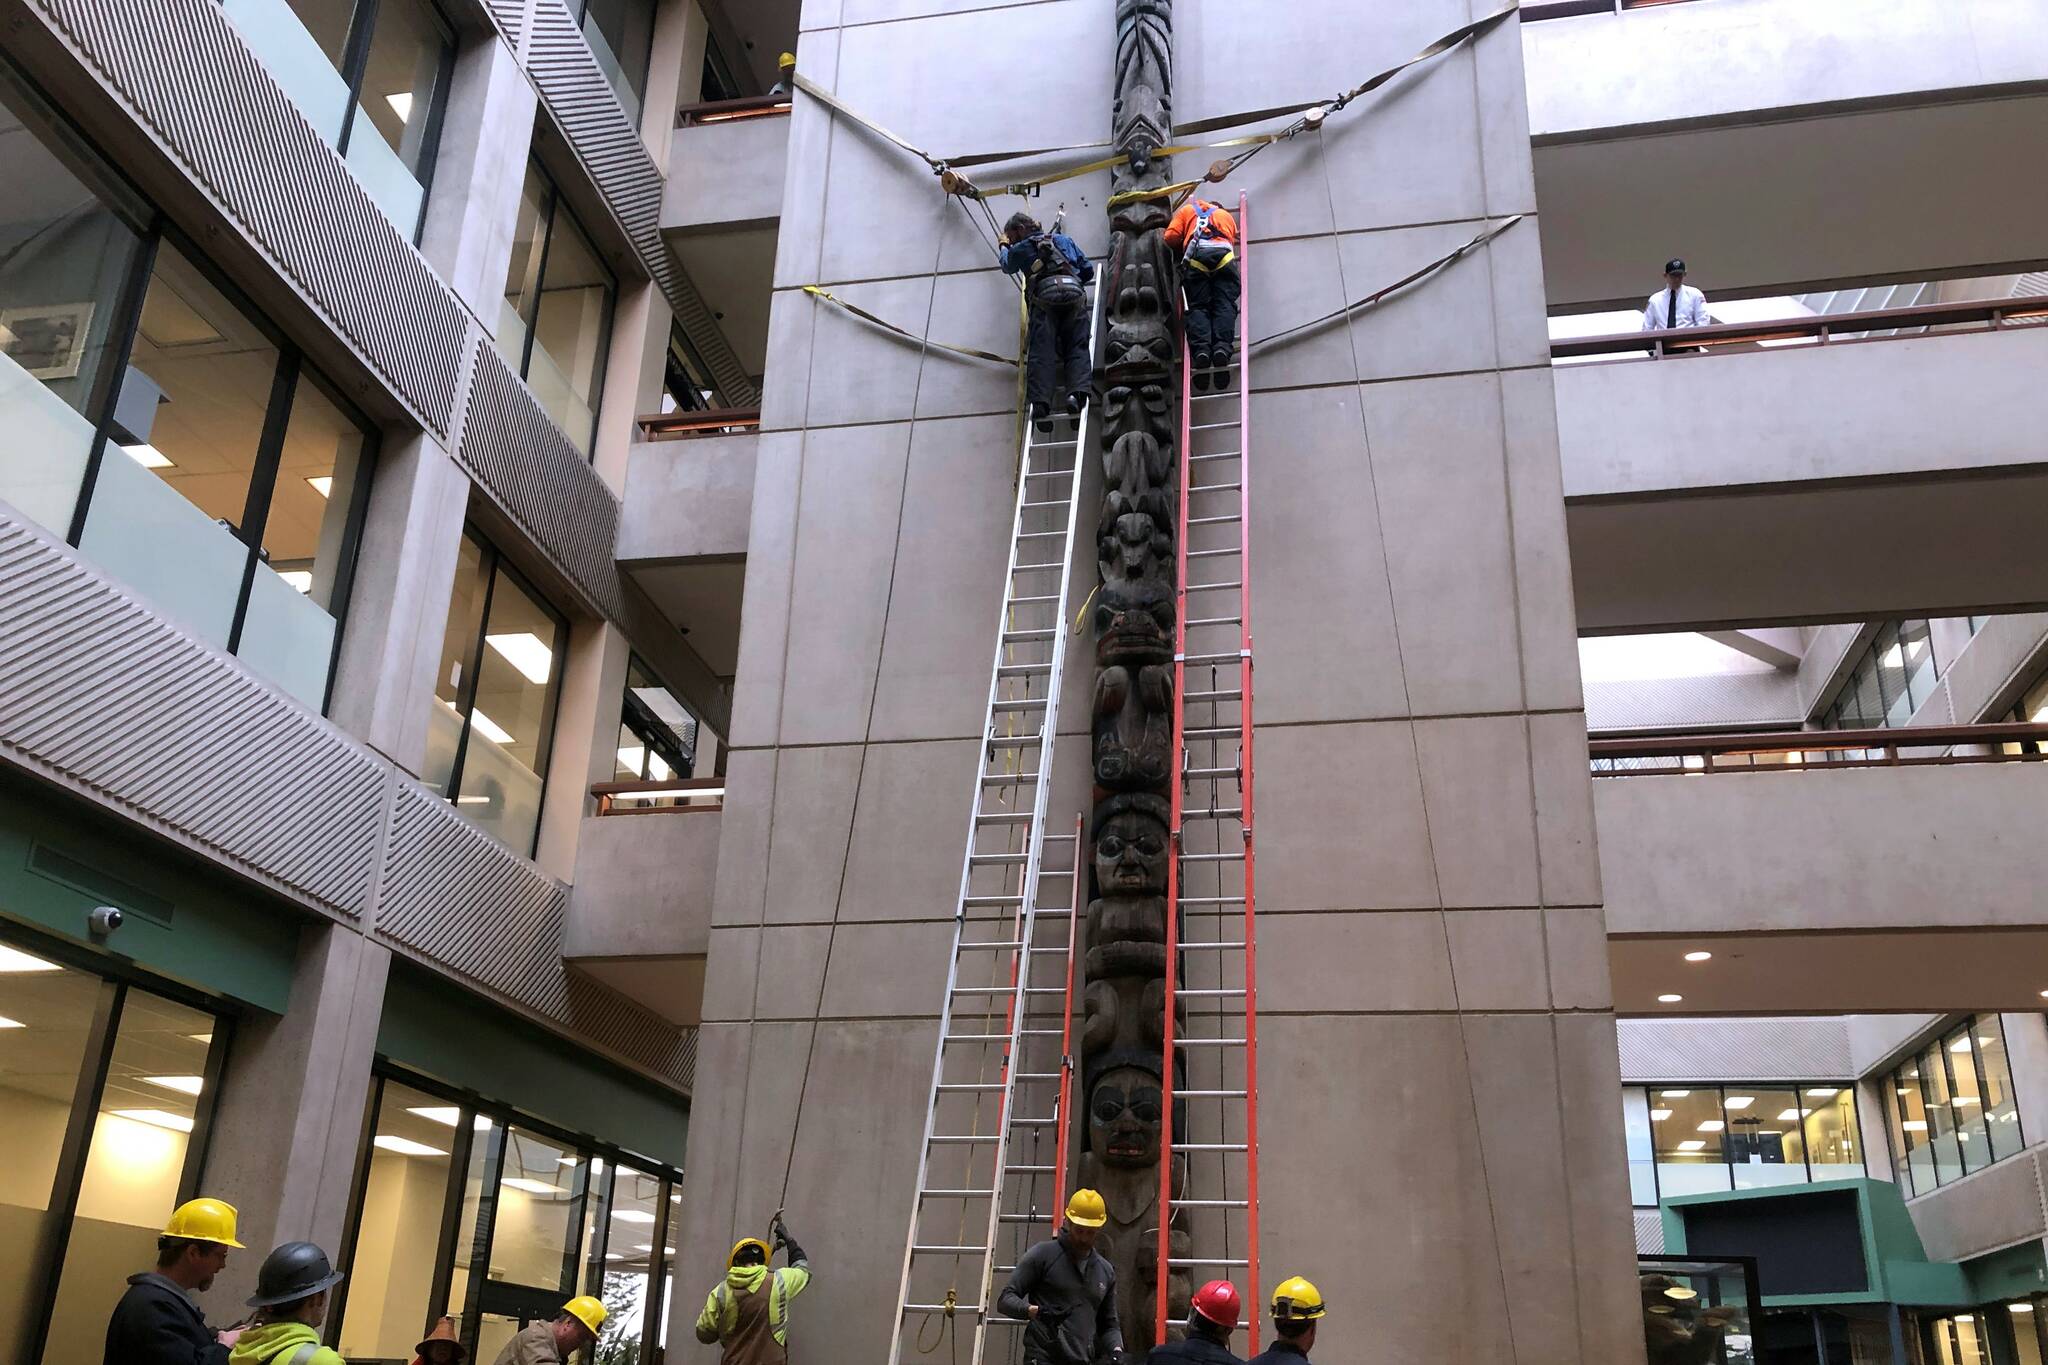 The Wooshkeetaan Kootéeyaa totem pole was re-installed at its new home in the atrium of the State Office Building on Friday, March 11, 2022. Workers from Alaska Electric Light and Power helped install the pole. (Peter Segall / Juneau Empire)